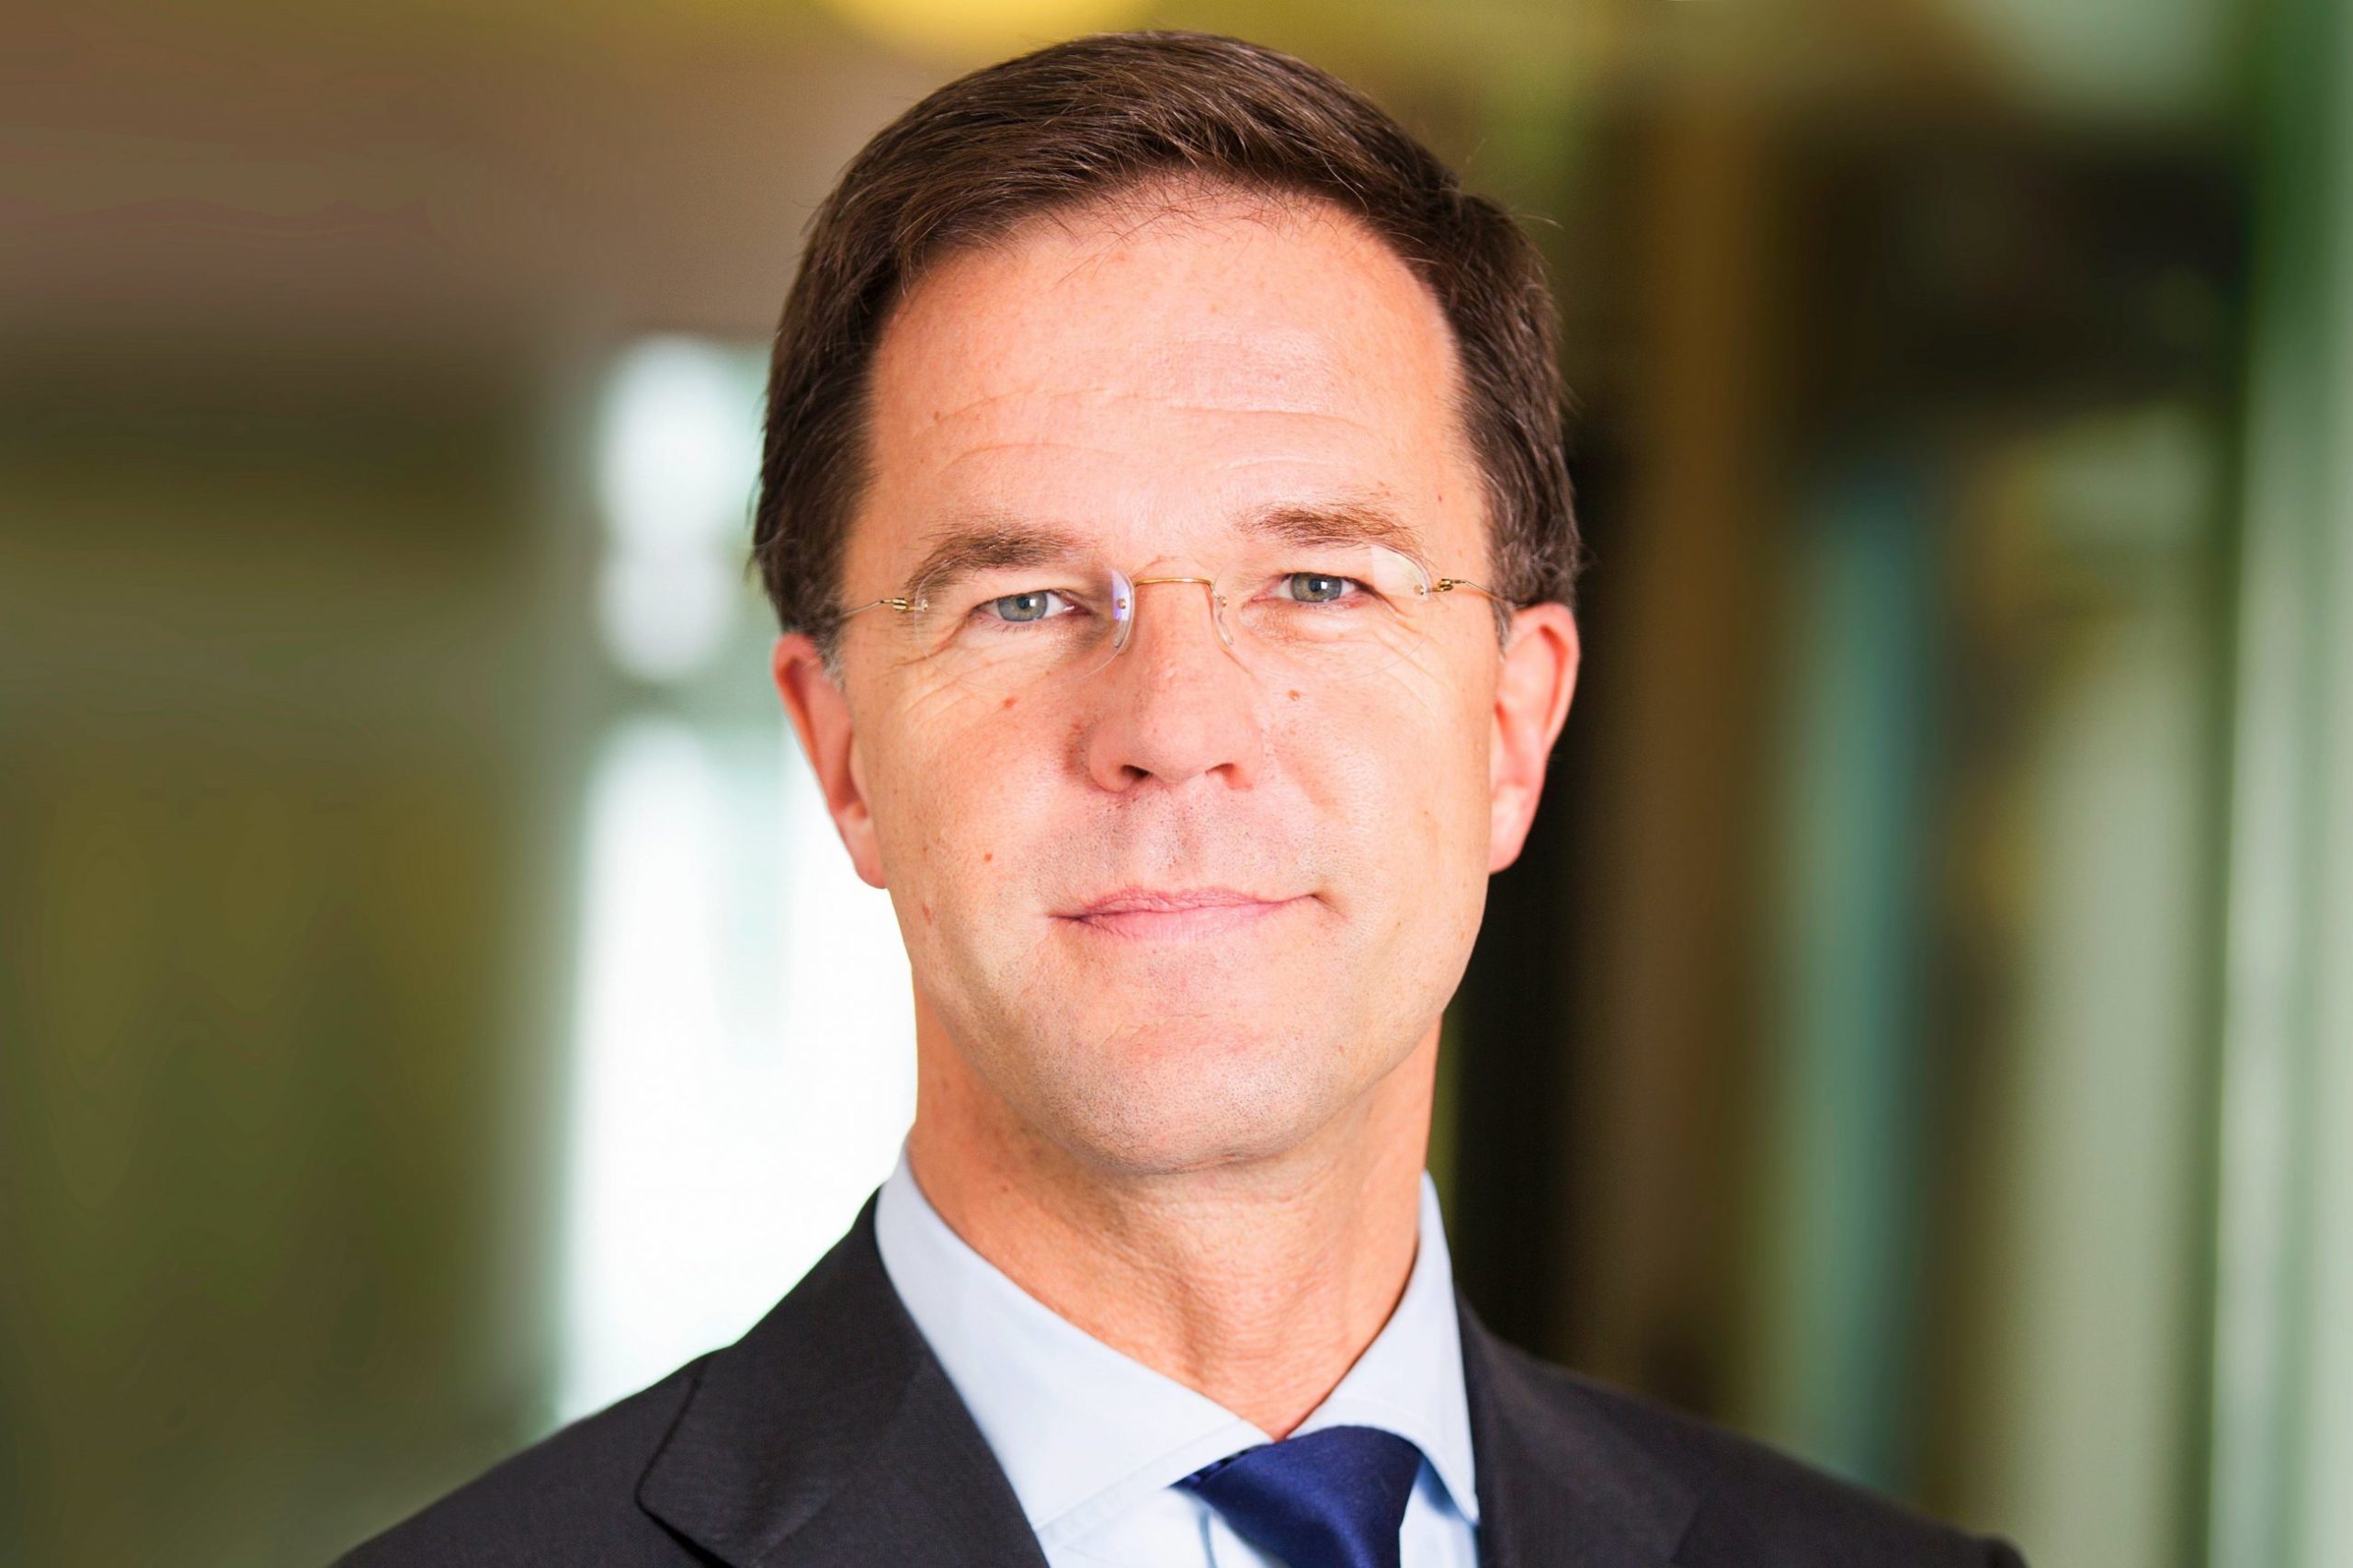 Netherlands poised to invest more in Tunisia (Mark Rutte)